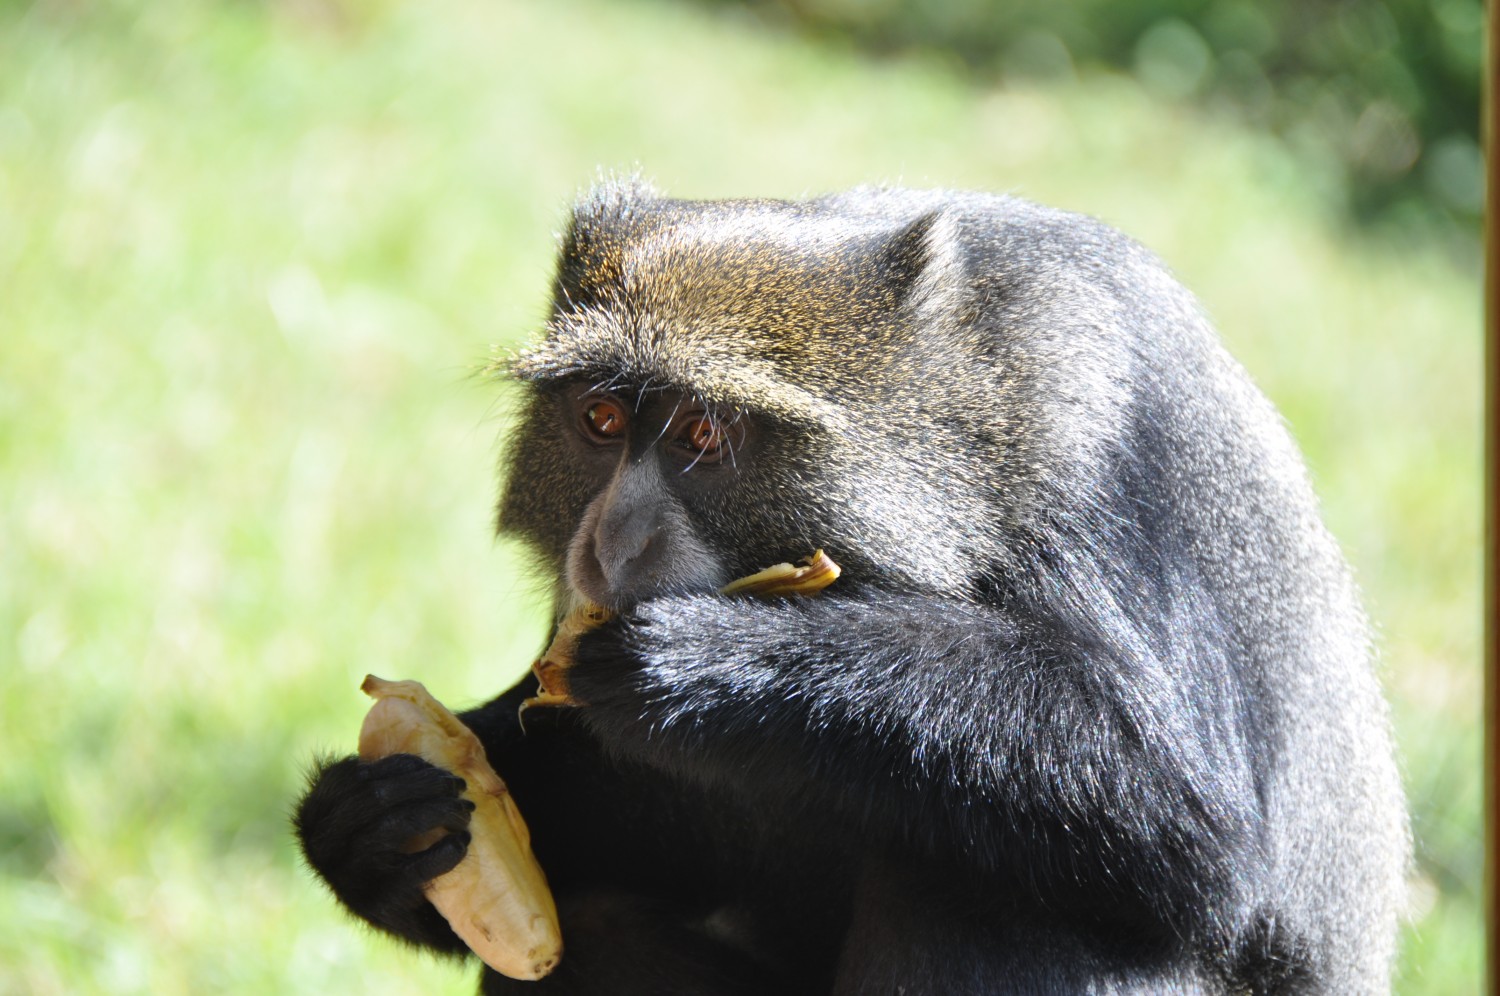 A monkey stealing lunch